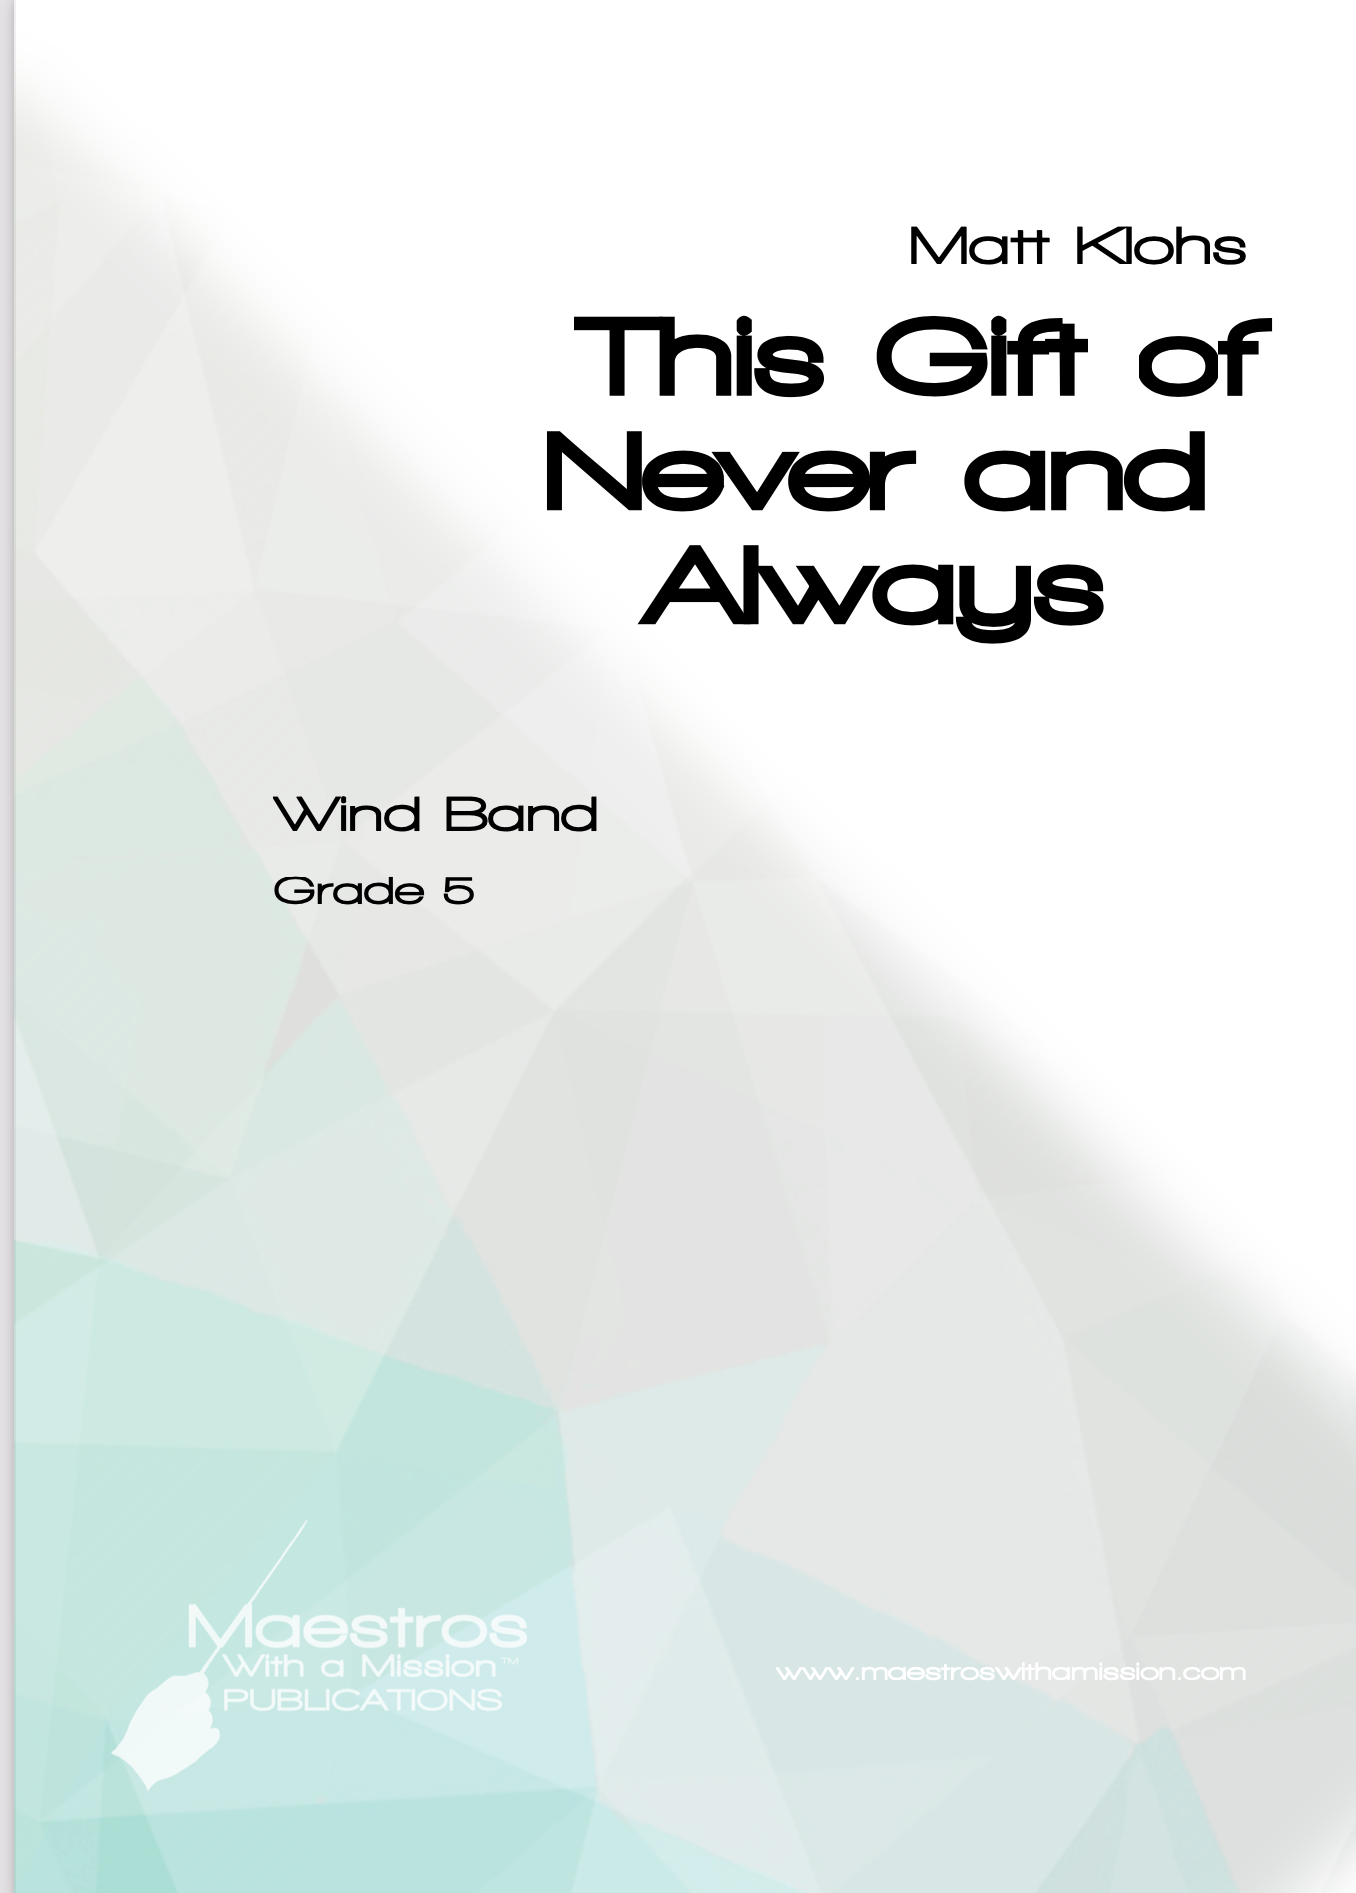 This Gift Of Never And Always by Matt Klohs